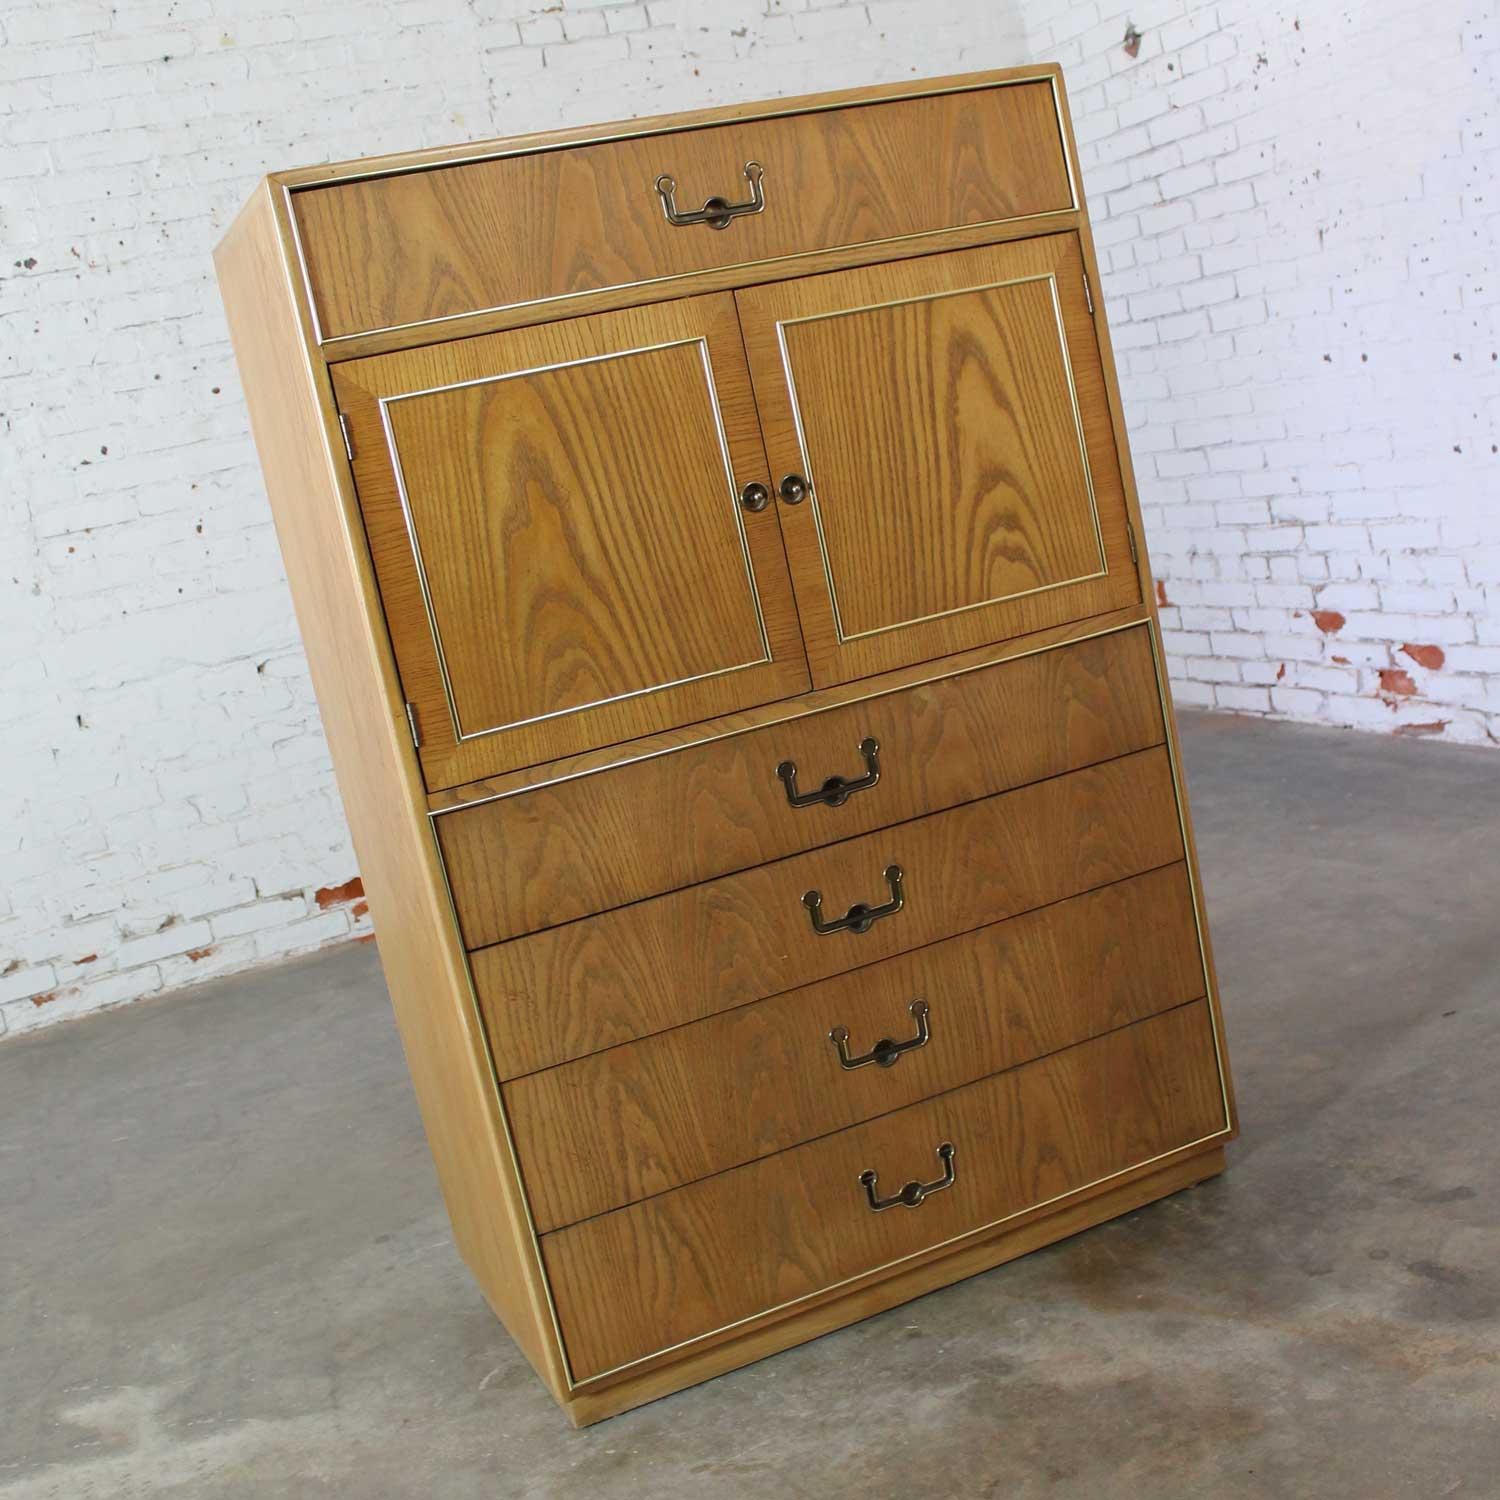 Handsome vintage modern Campaign style oak Gentleman’s chest by Founders Furniture. Comprised of book matched oak veneer, six drawers and two double doors with brass toned hardware, and brass plated beading detail. Beautiful condition, keeping in